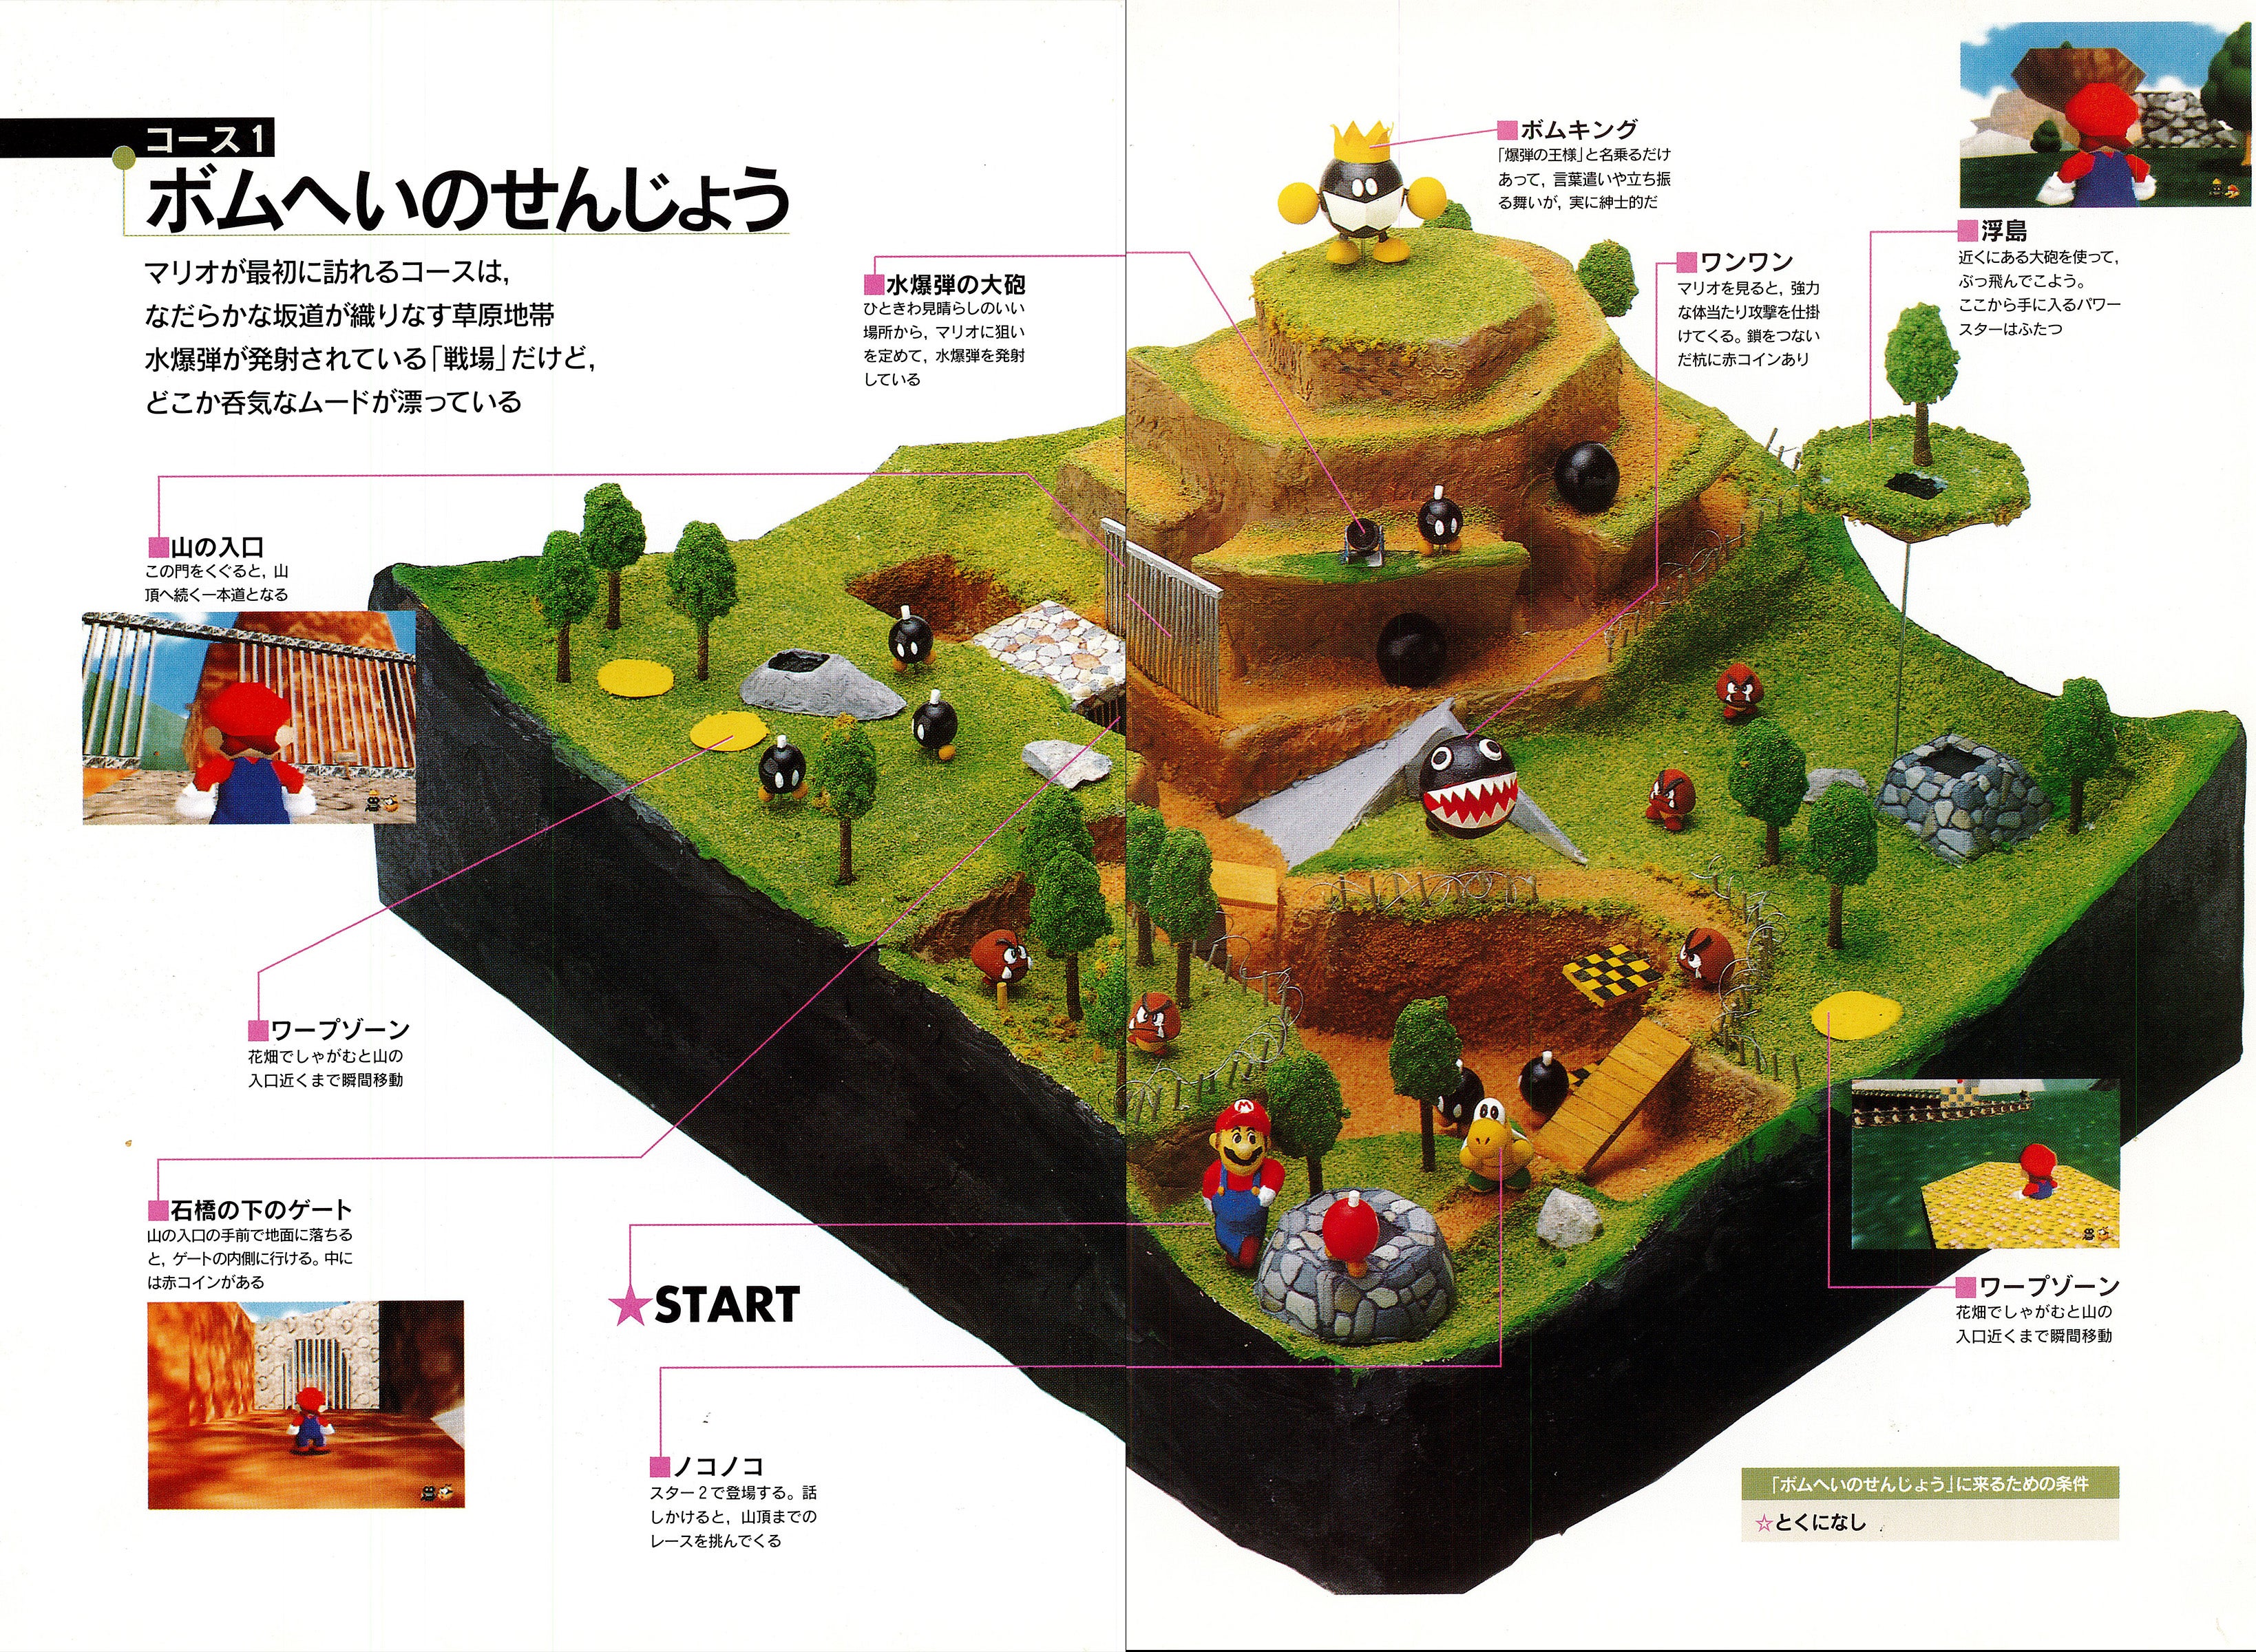 Super Mario 64 S Charming 3d Guidebook Now Uploaded Online For Everyone To Enjoy Eurogamer Net